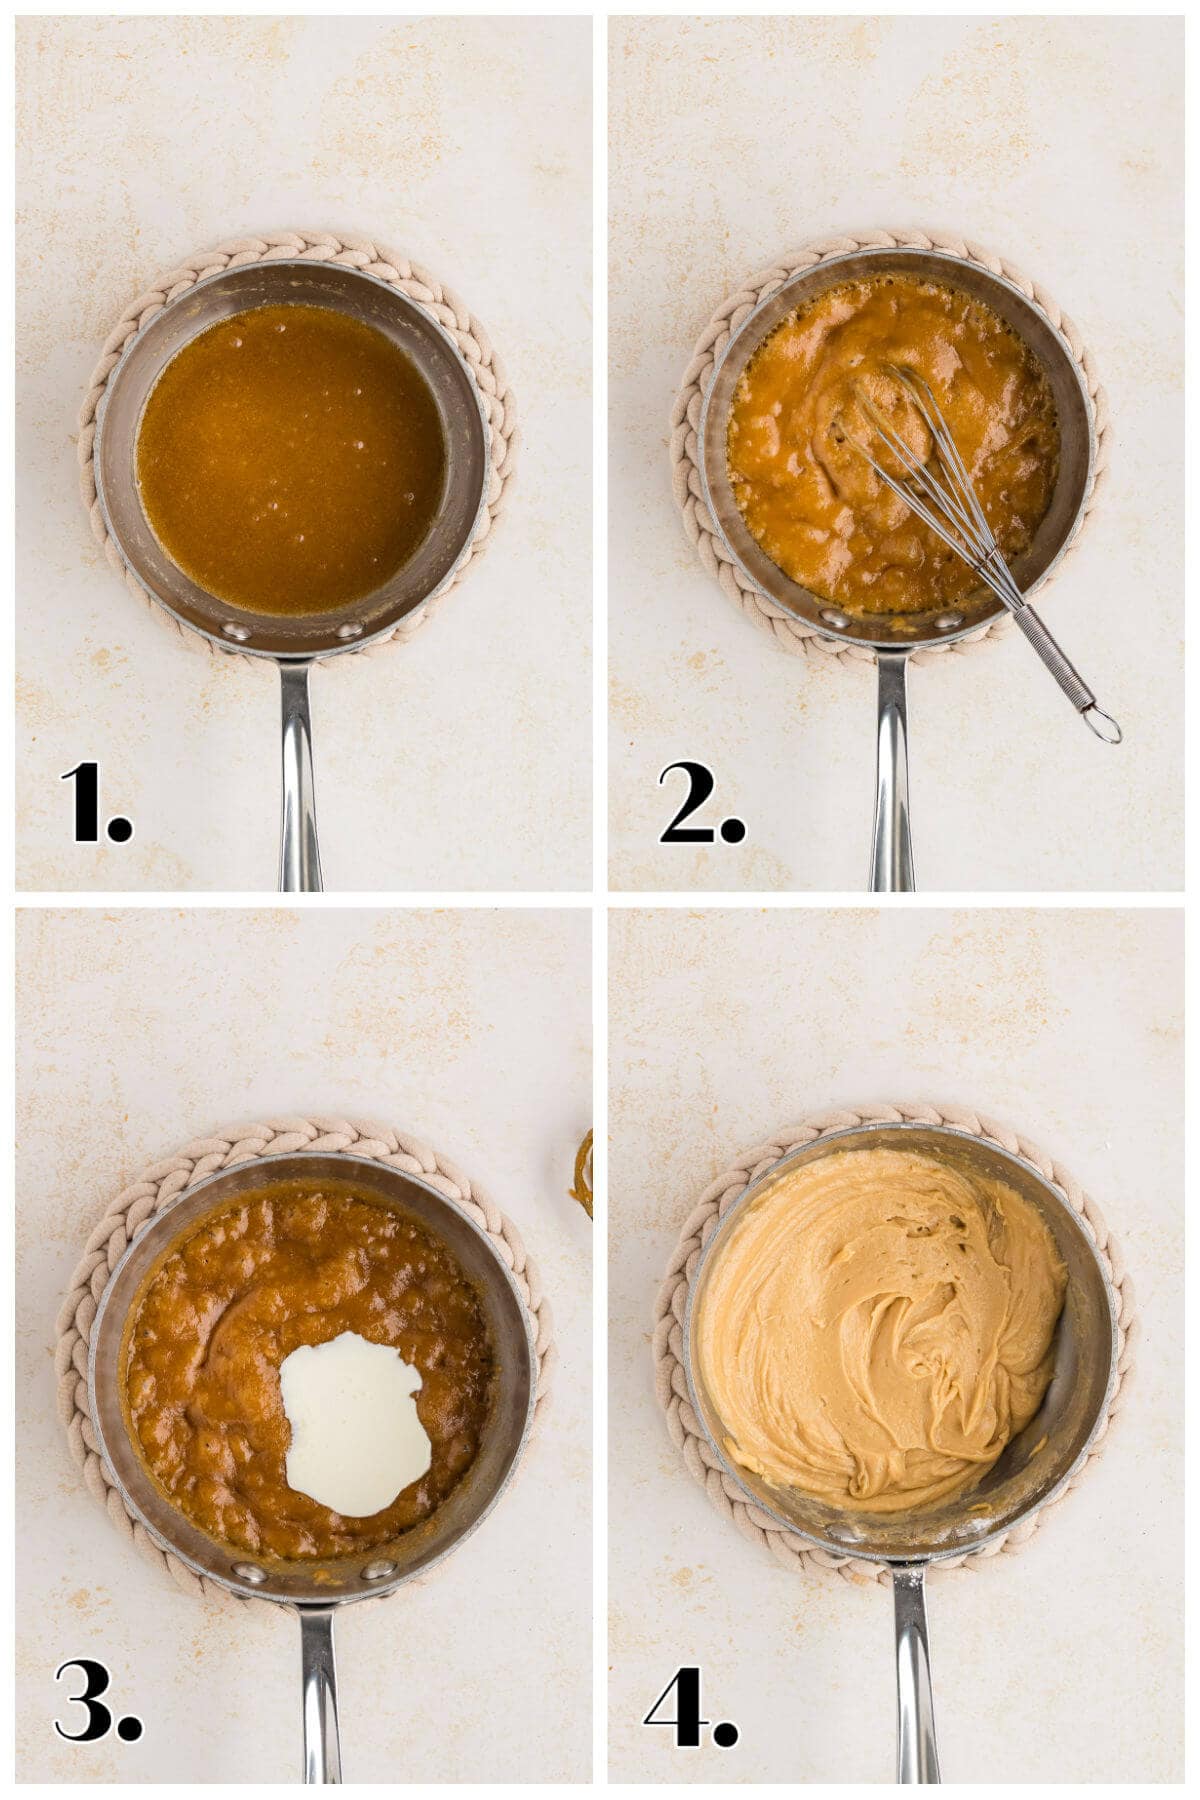 4-image collage showing how to make caramel icing.